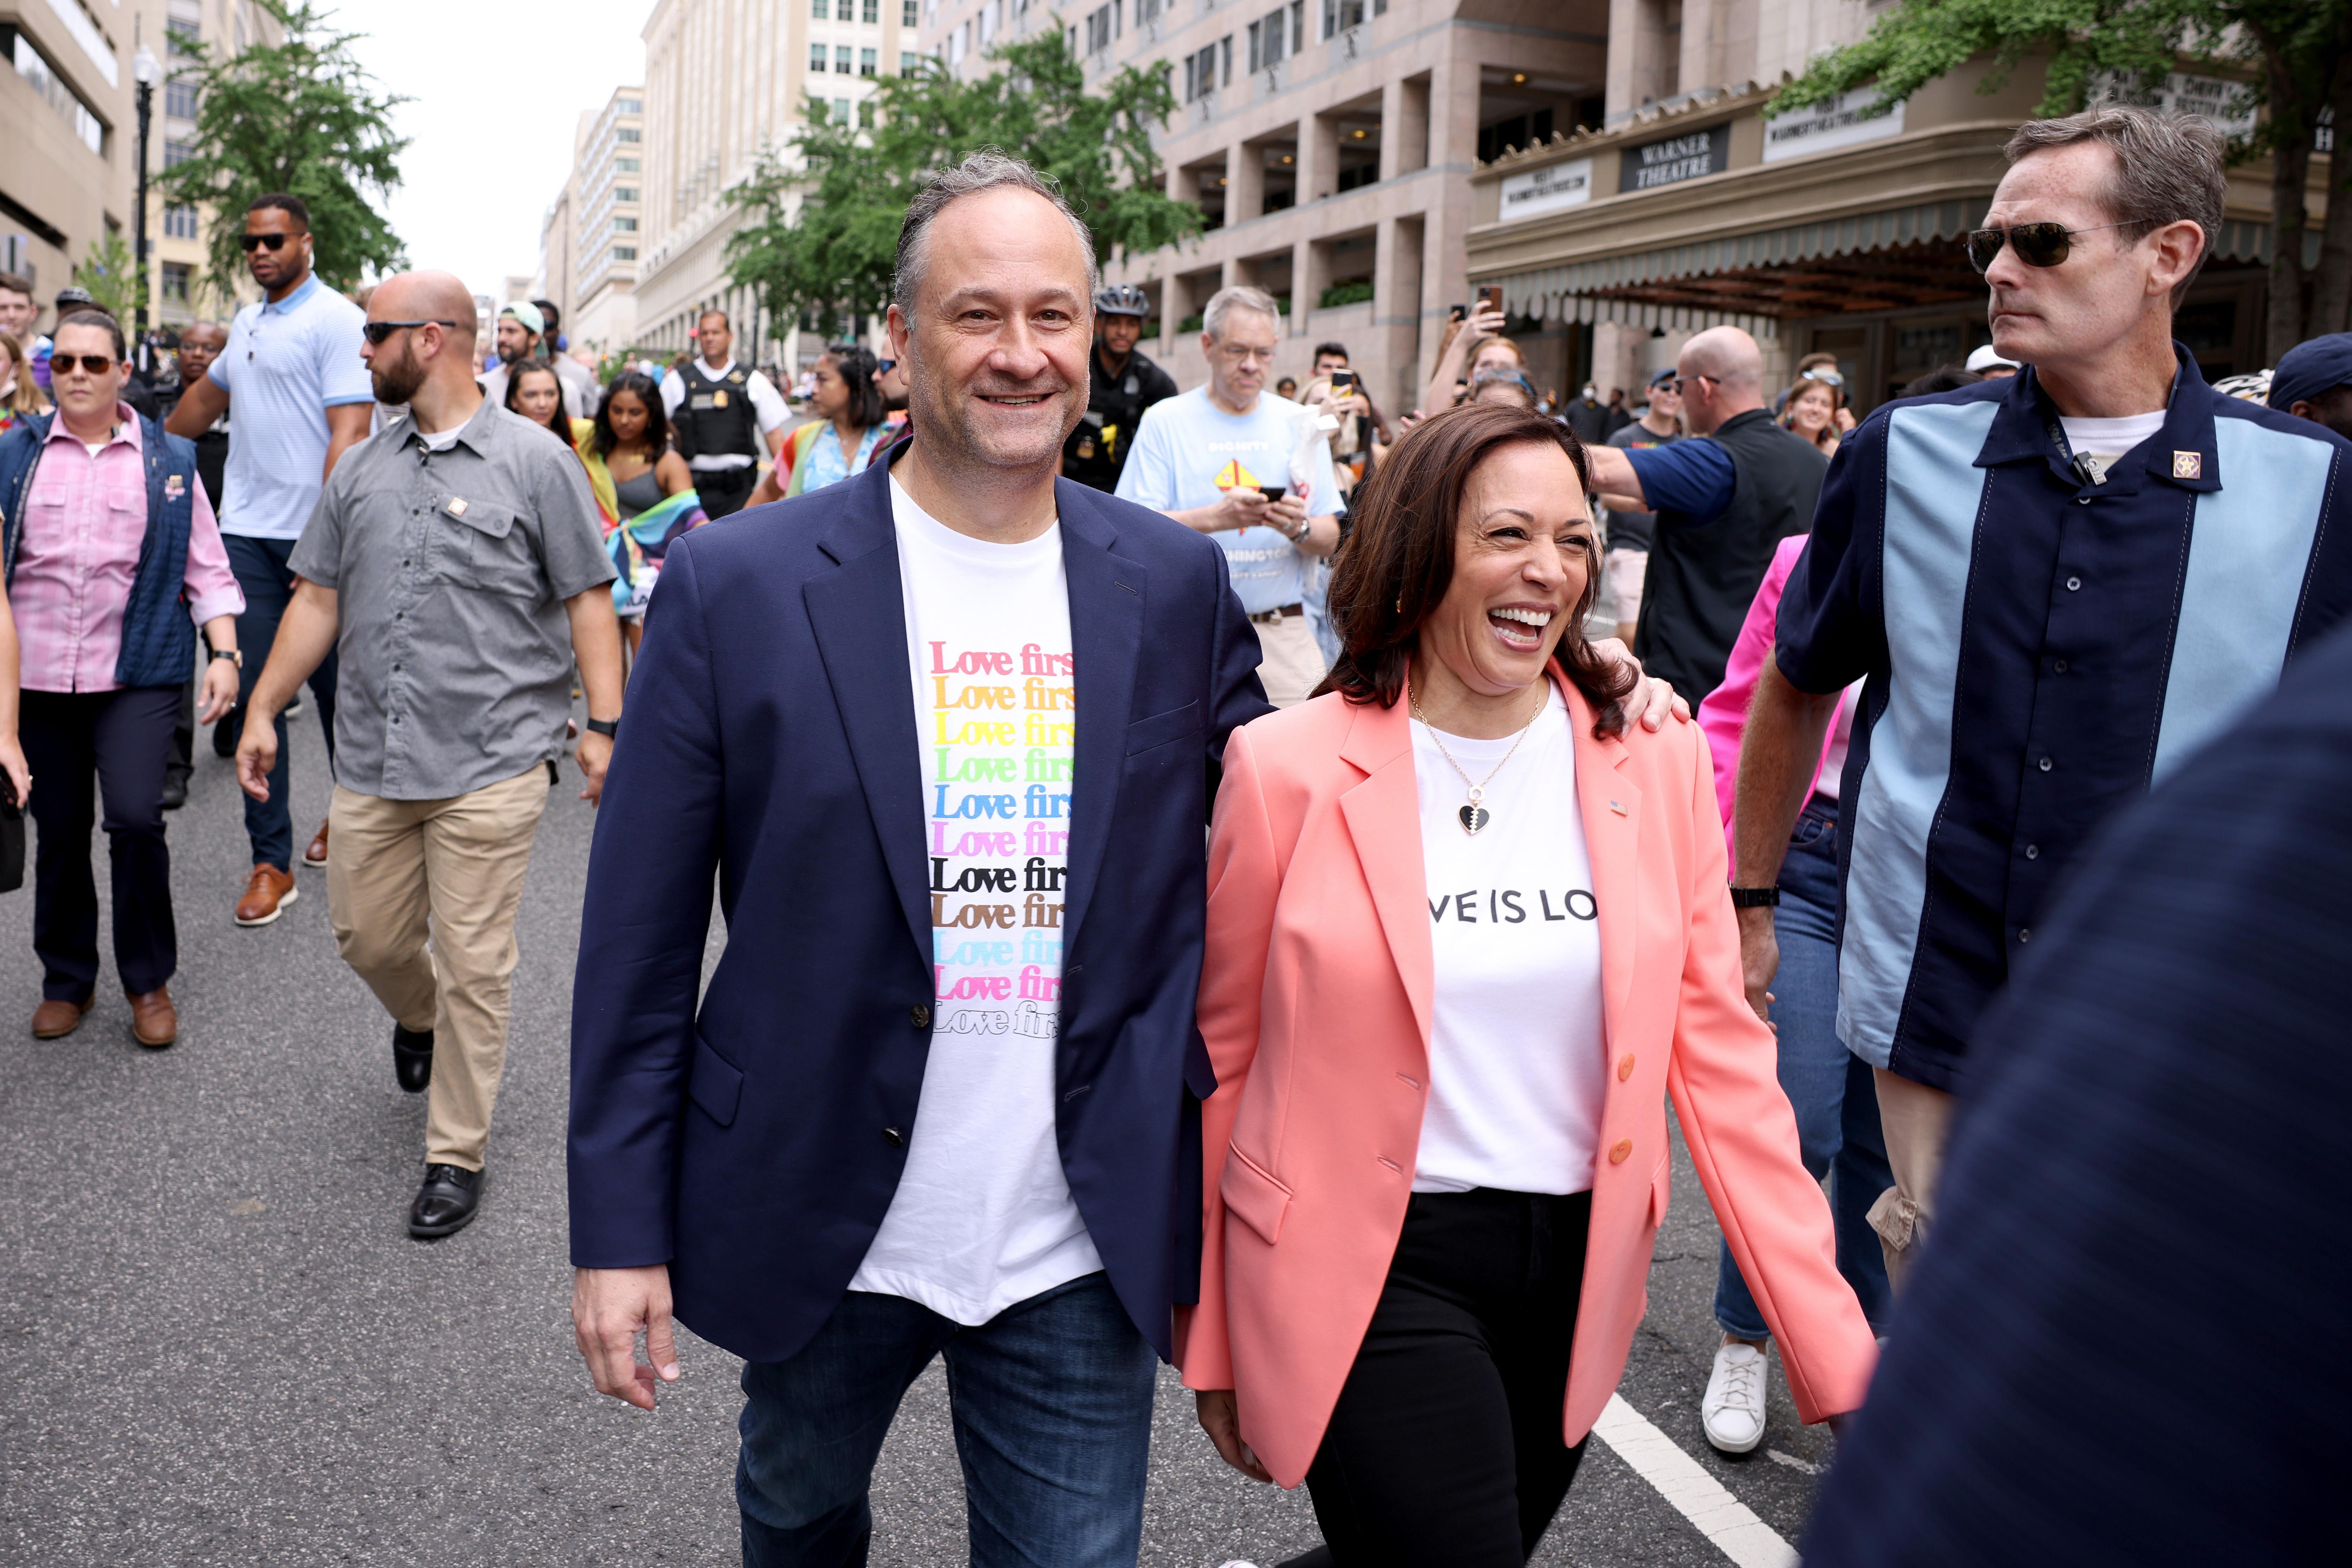 Vice President Kamala Harris and husband Doug Emhoff join marchers for the Capital Pride Parade on June 12, 2021 in Washington, D.C.